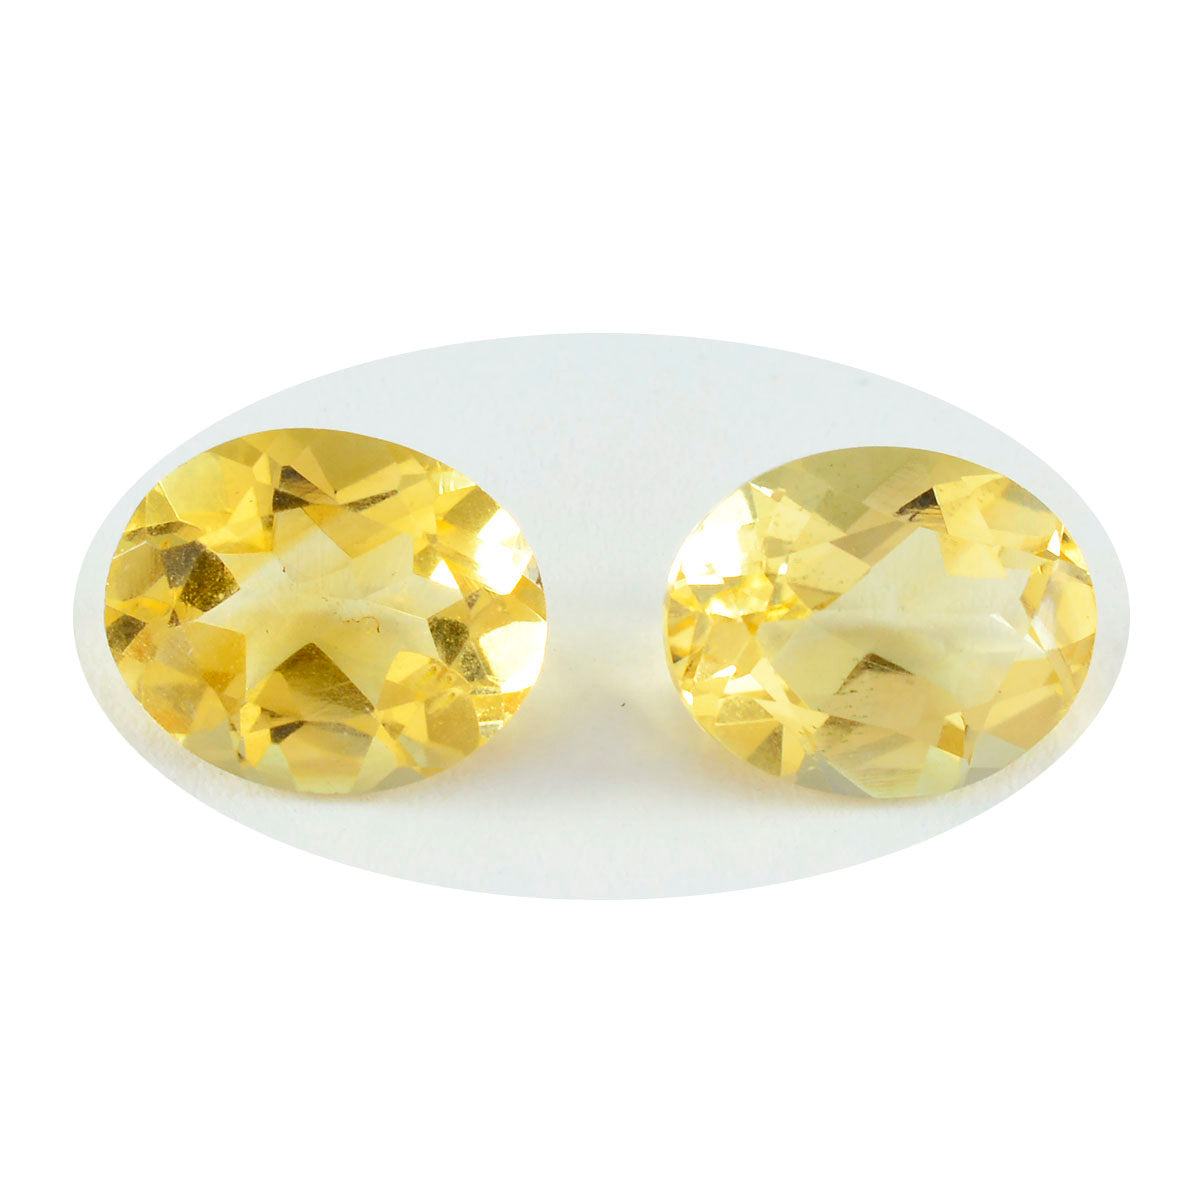 Riyogems 1PC Natural Yellow Citrine Faceted 8x10 mm Oval Shape handsome Quality Gem